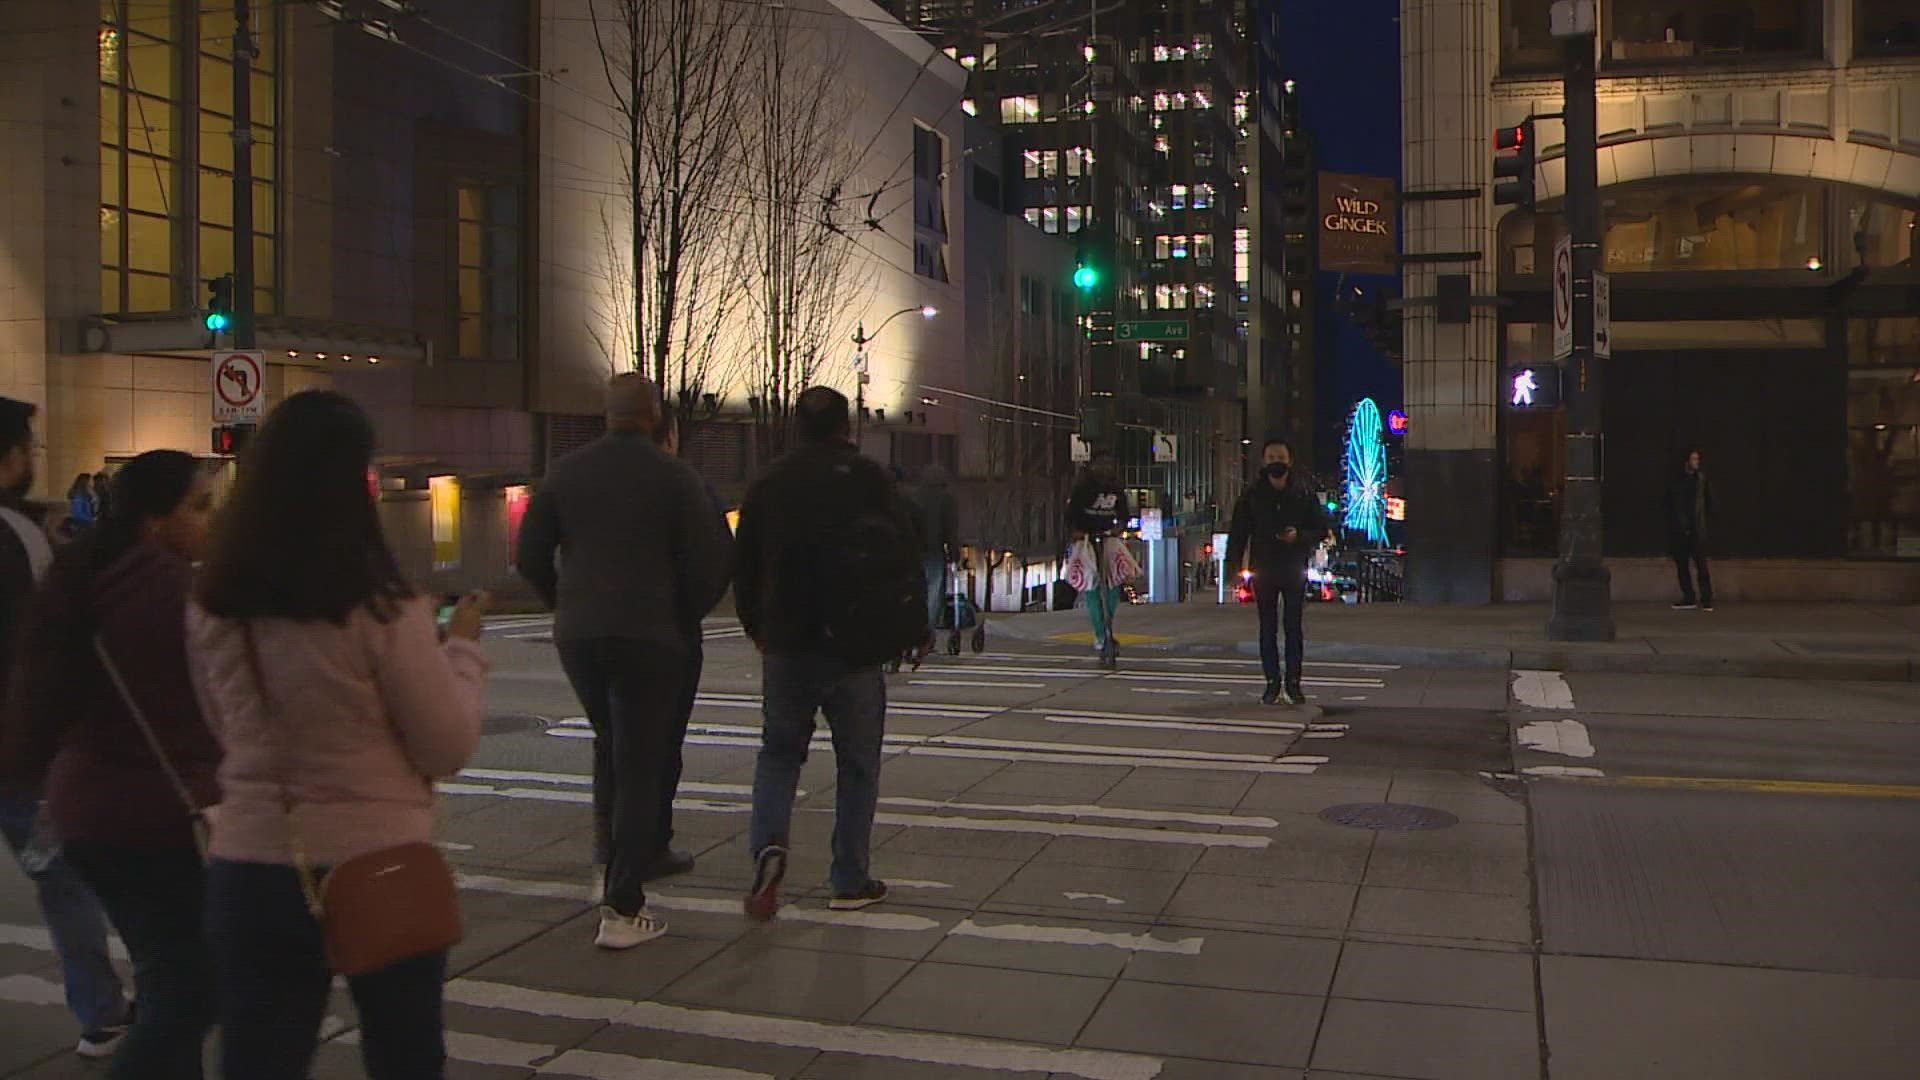 A new bill aims to repeal Washington’s jaywalking law so that people can move more freely around their city streets and instead use common sense.